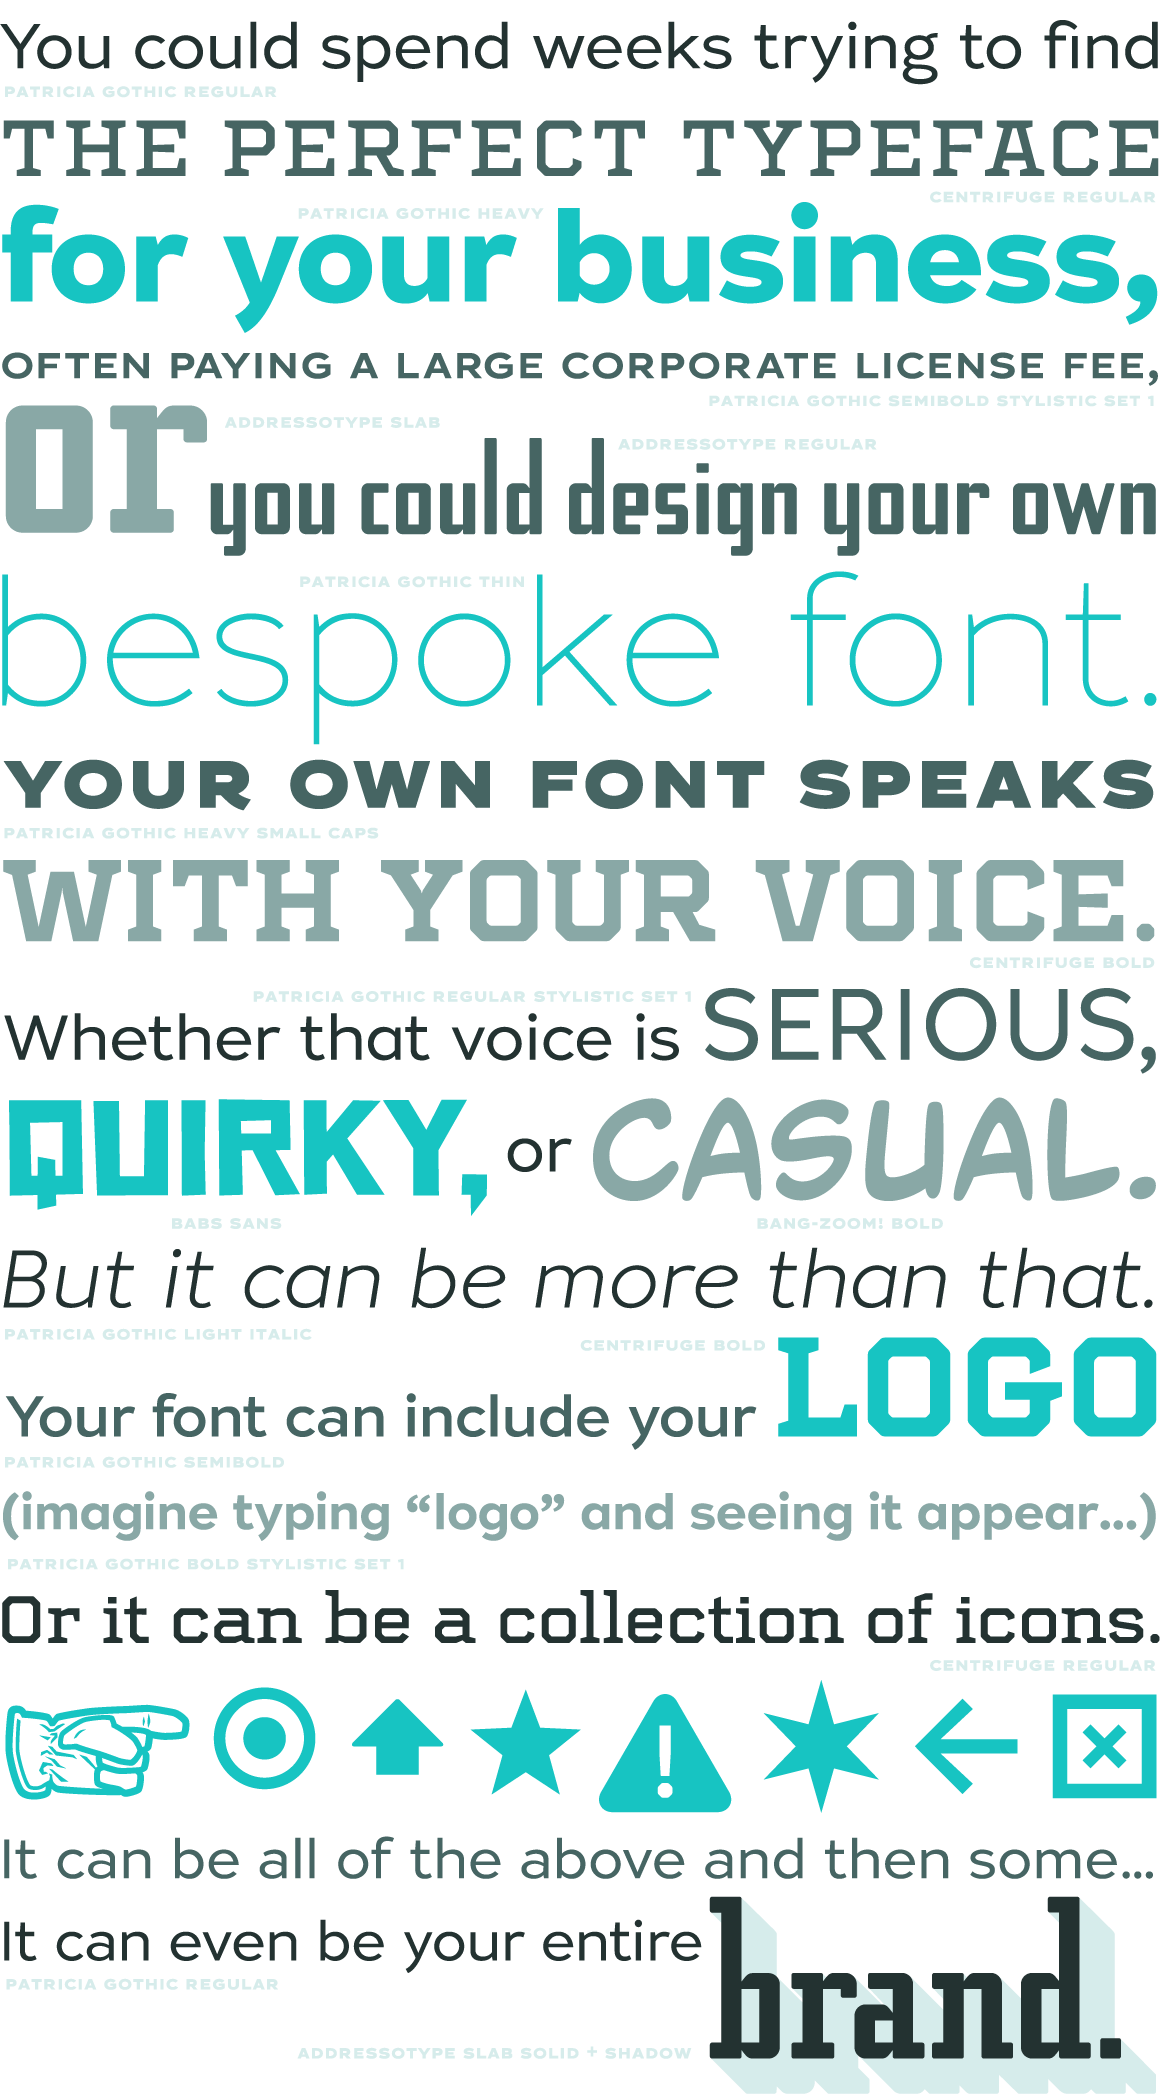 You could spend weeks trying to find the perfect typeface for your business, often paying a large corporate license fee, or you could design your own bespoke font. Your own font speaks with your voice. Whether that voice is serious, quirky, or casual. But it can be more than that. Your font can include your logo (imagine typing "logo" and seeing it appear ...) Or it can be a collection of icons. [ icons ] It can be all of the above and then some ... It can even be your entire brand.